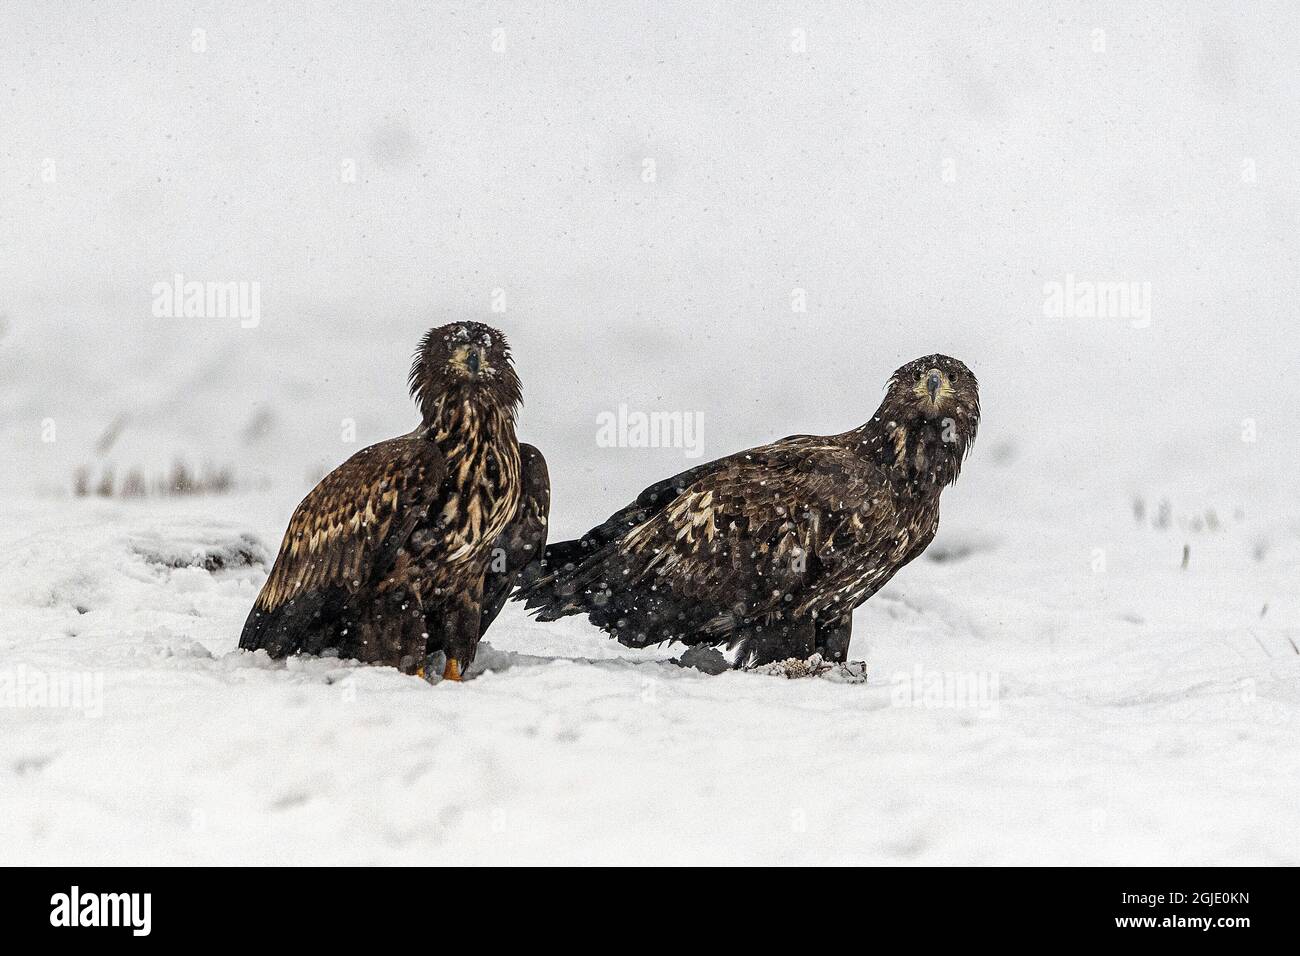 The white-tailed eagle (Haliaeetus albicilla) young eagles (1-2 years old) Photo: Ola Jennersten / TT / code 2754  Stock Photo